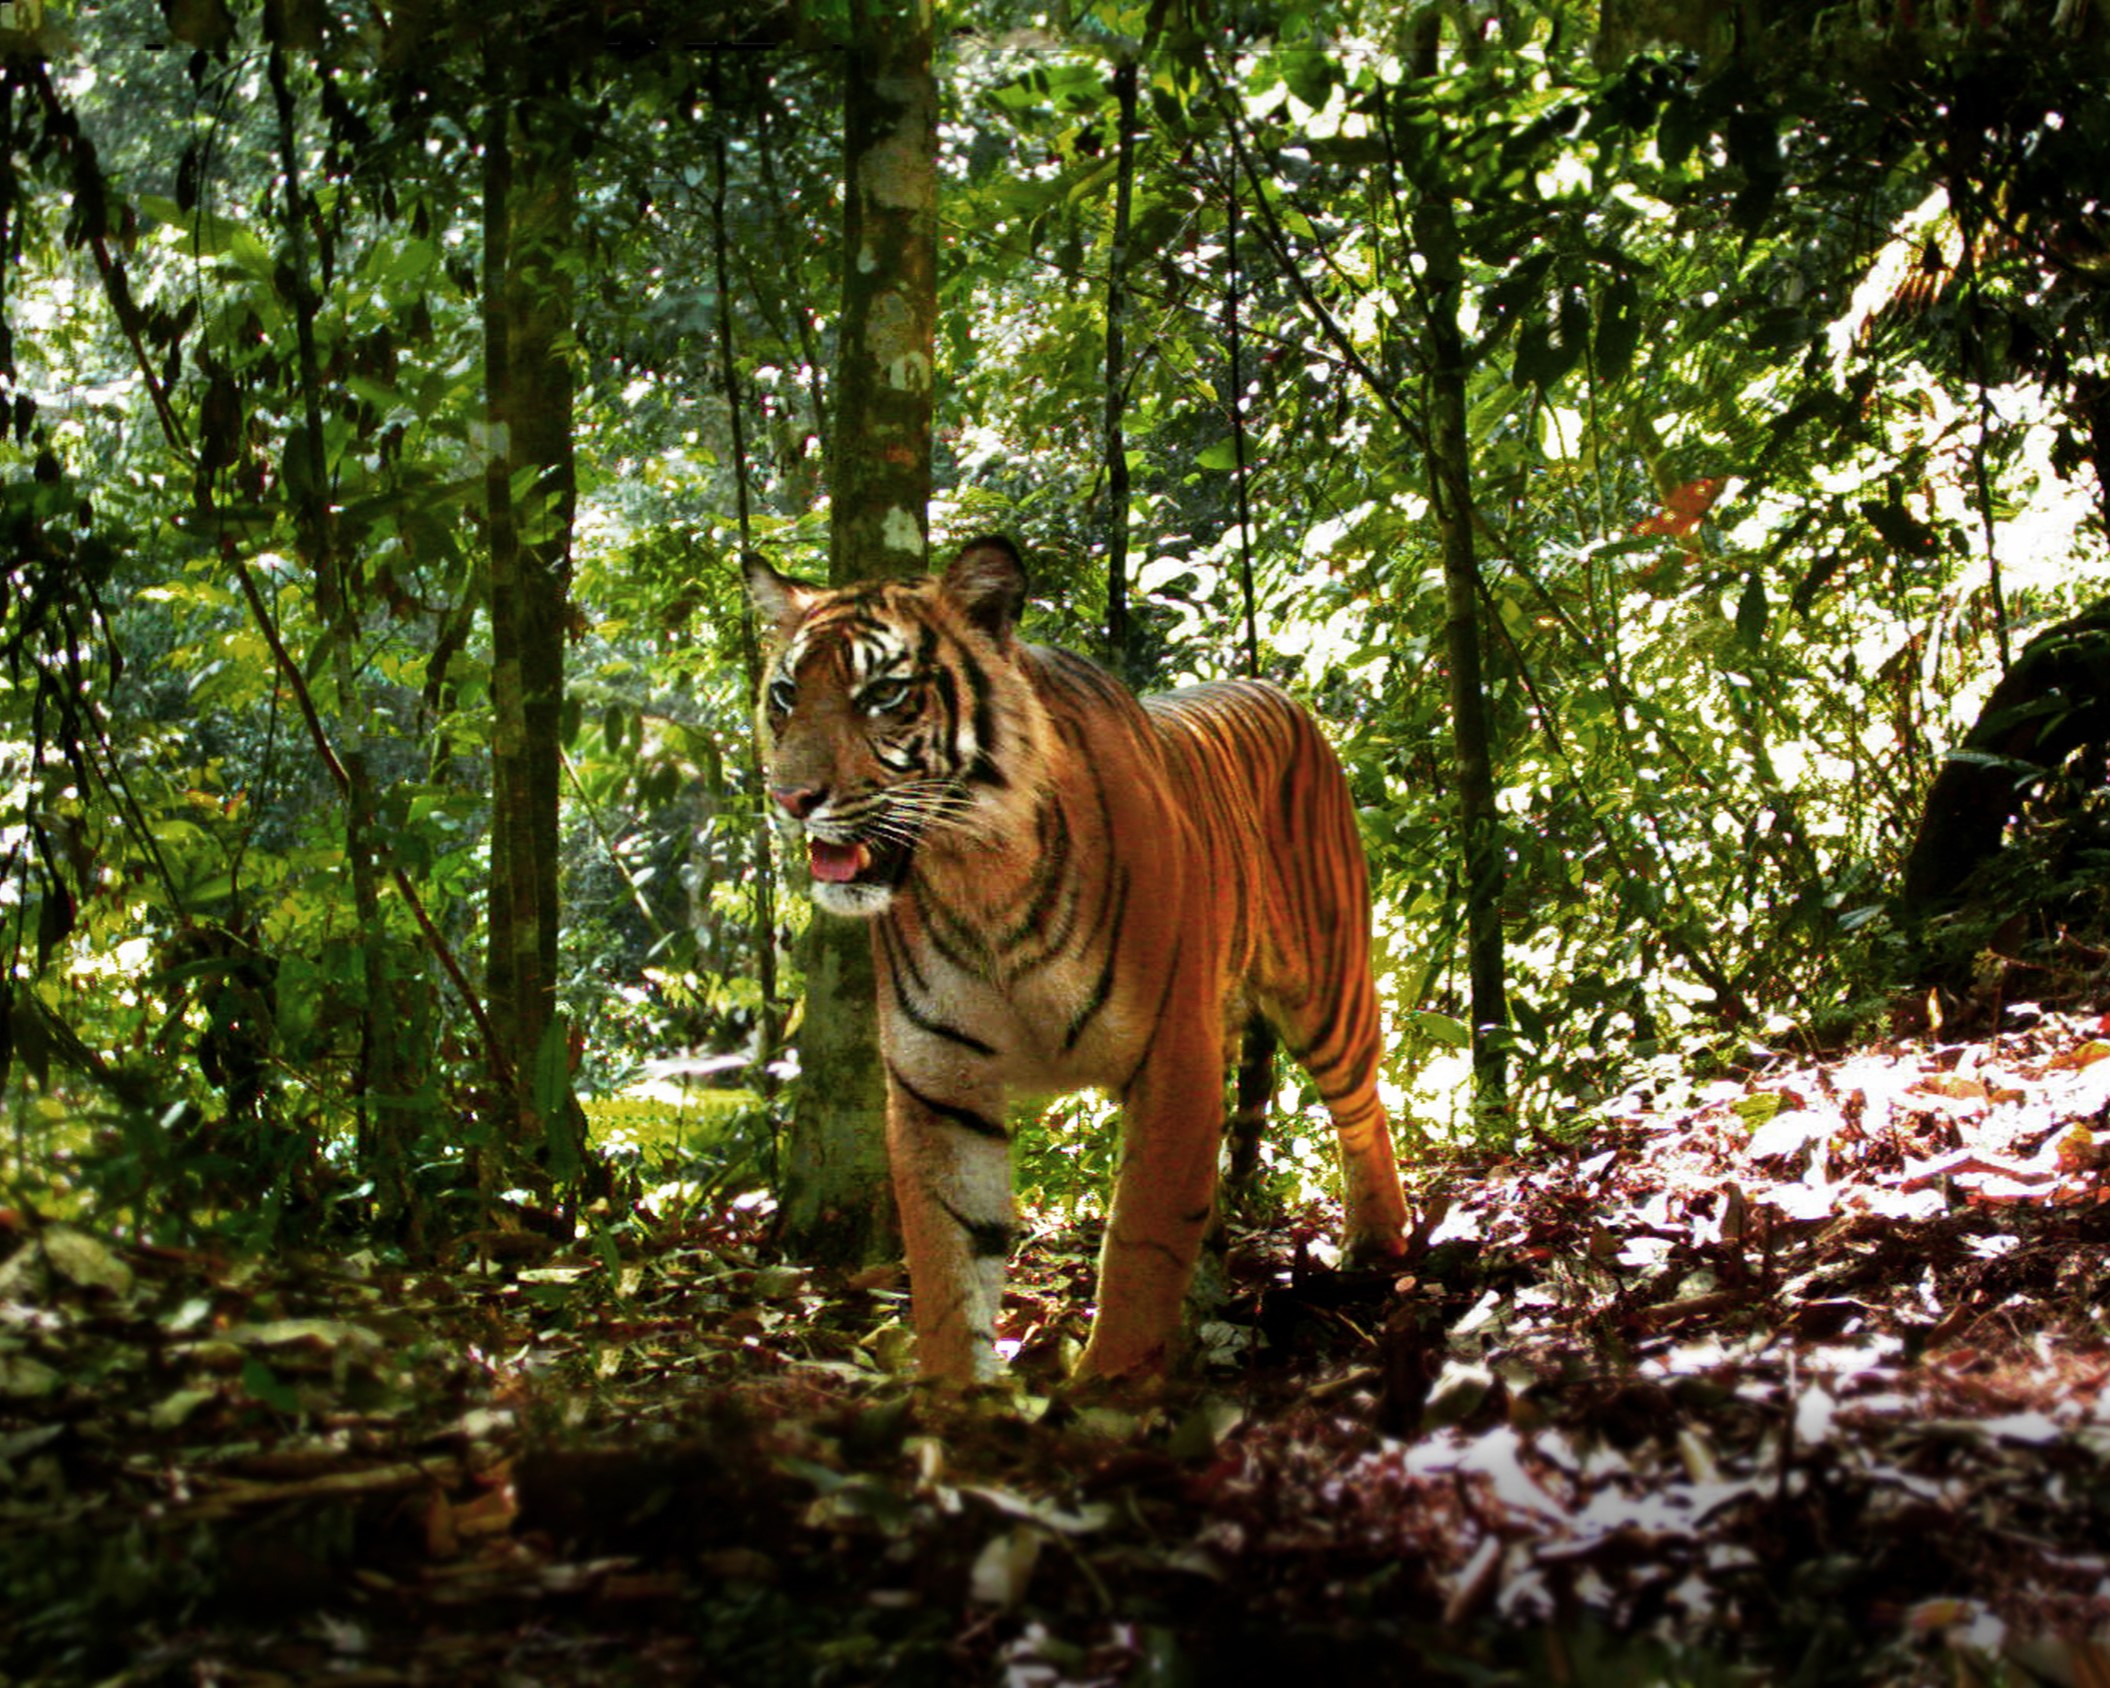 Sumatra tiger in the forest